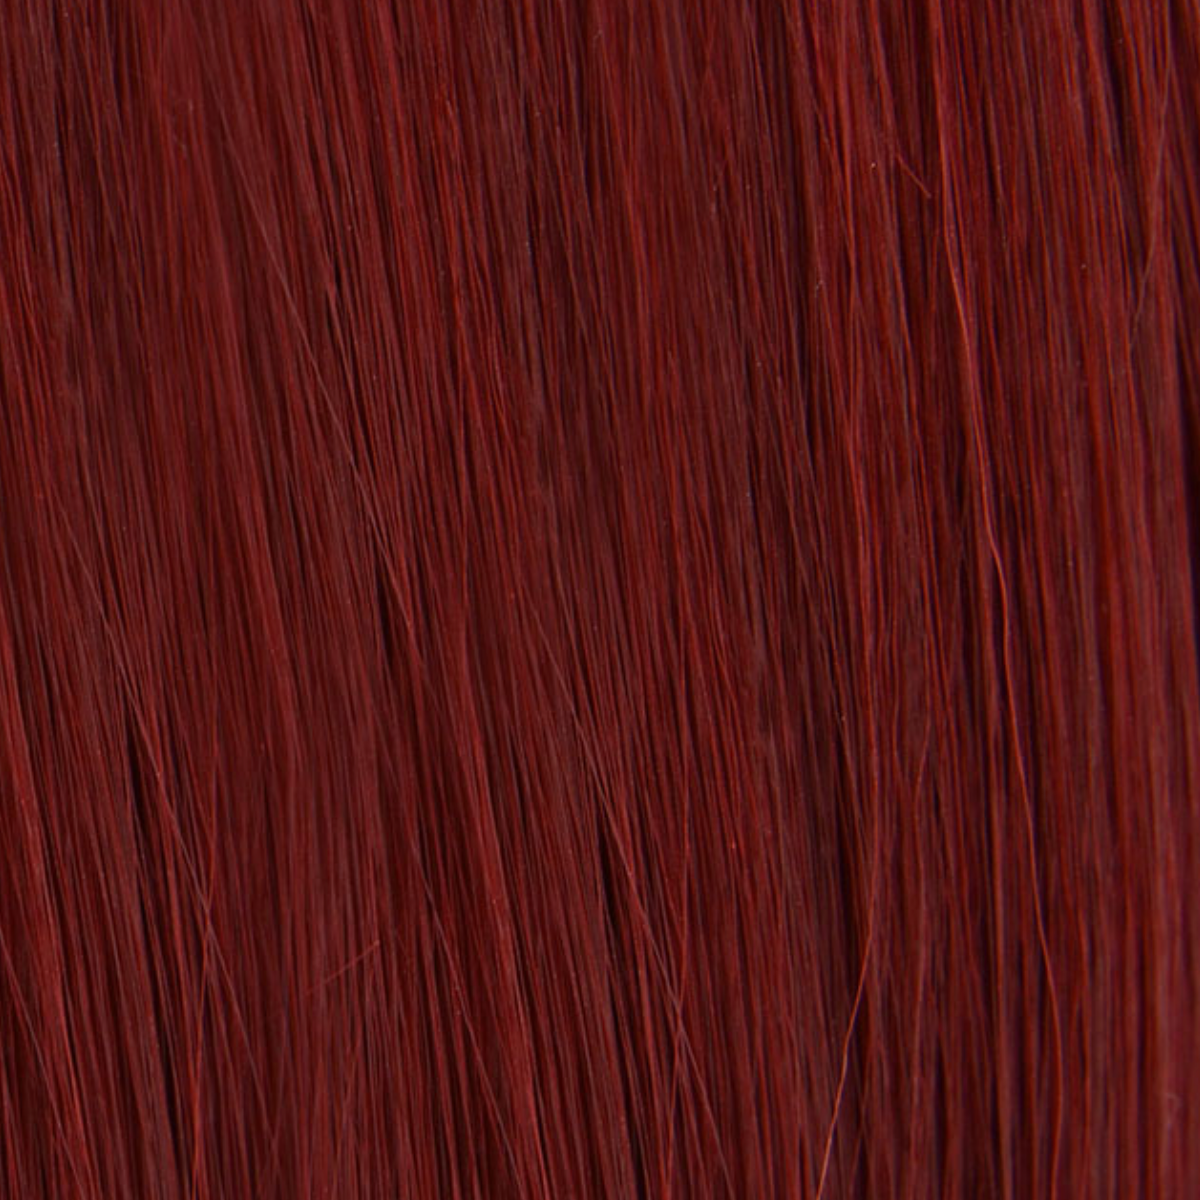 BEAUTY WORKS 18 " Deluxe Remy Instant Clip-In Extensions Cherry